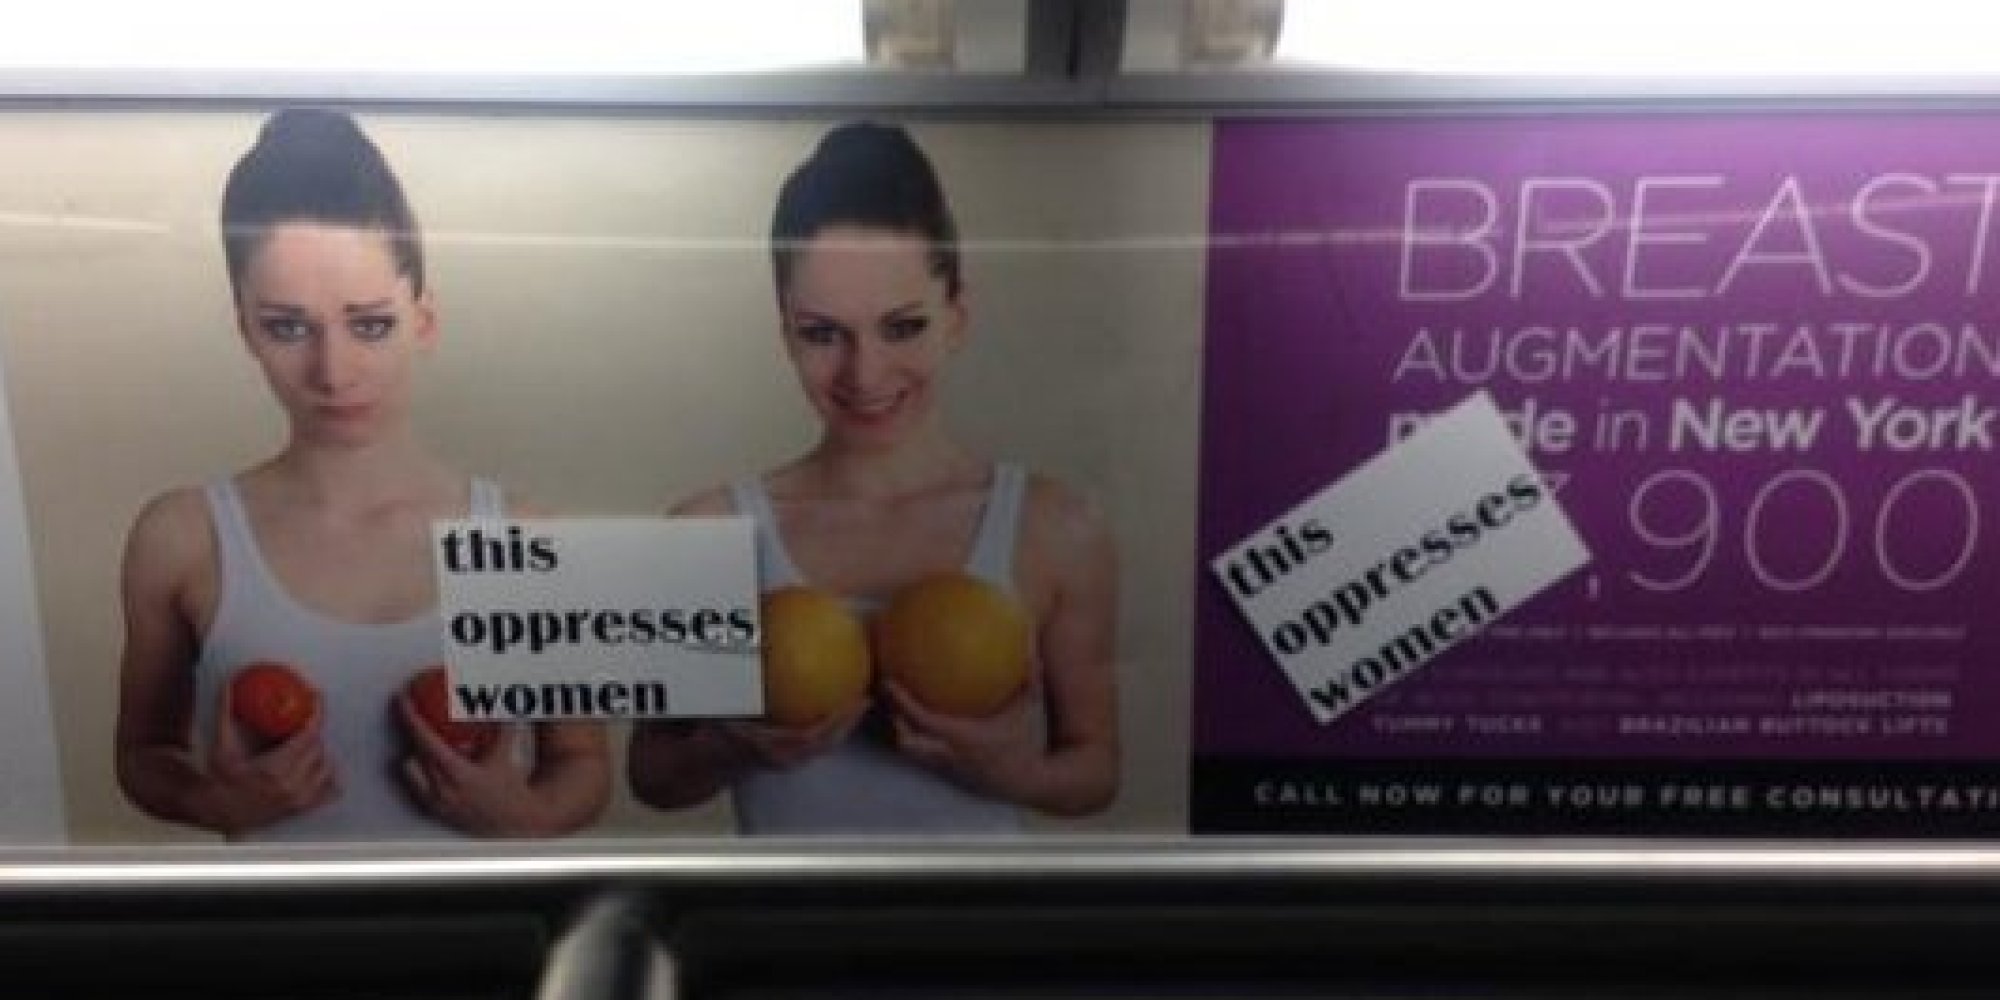 This Oppresses Women Stickers Give Body Shaming Ads The Edit They So